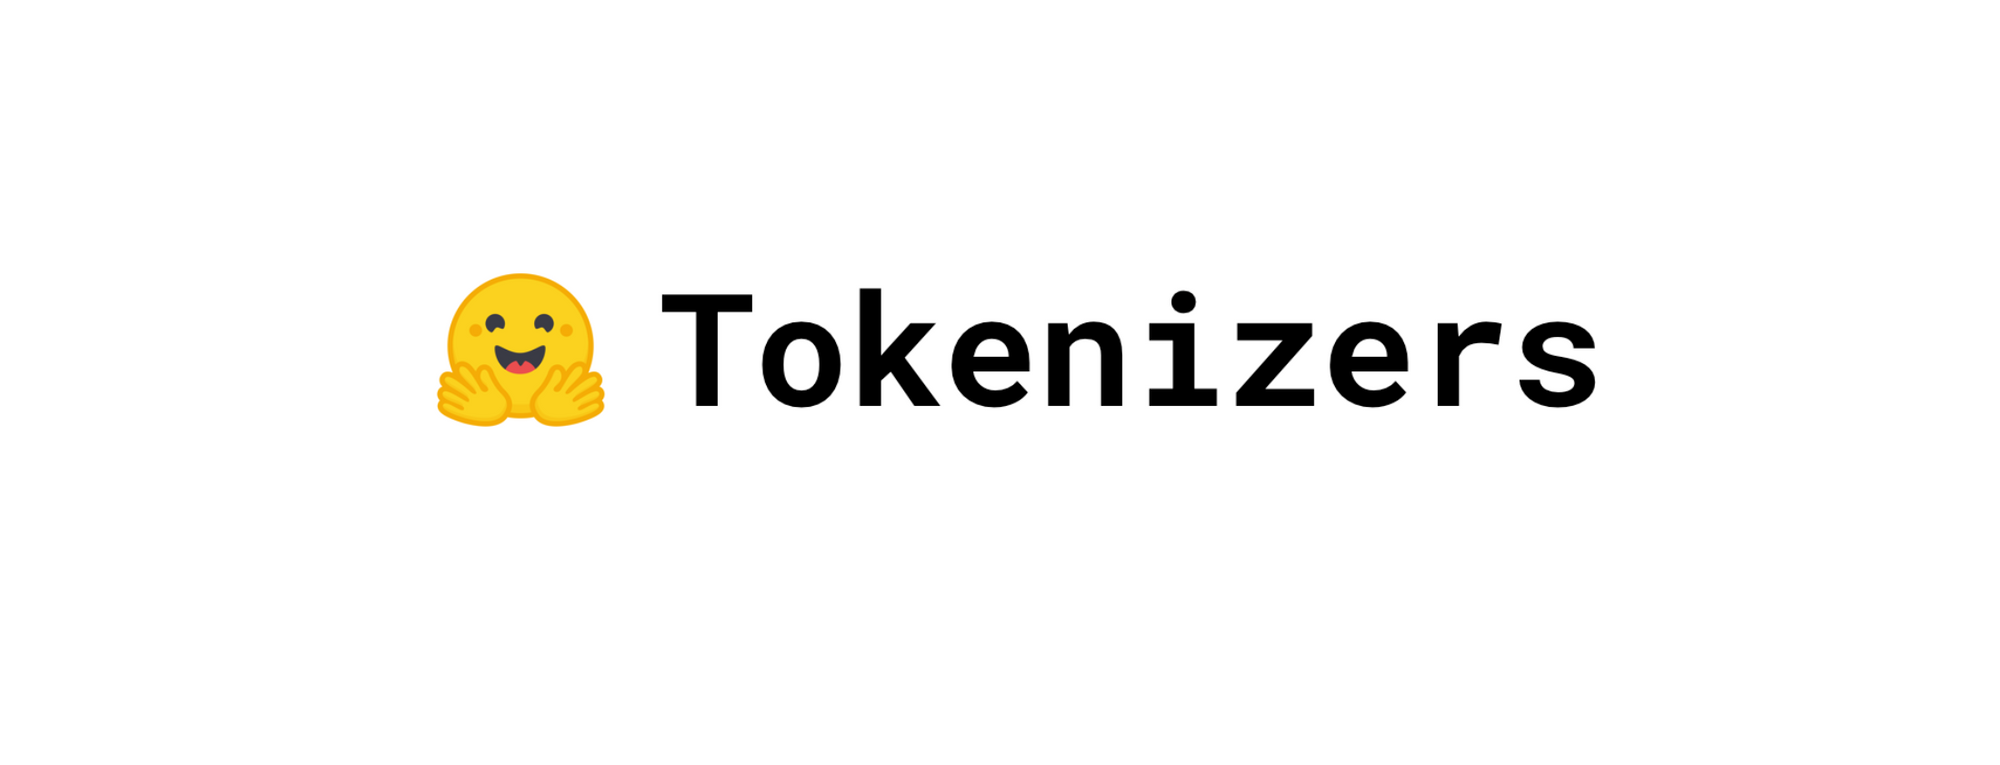 Image for Tokenizers Explained – How Tokenizers Help AI Understand Language